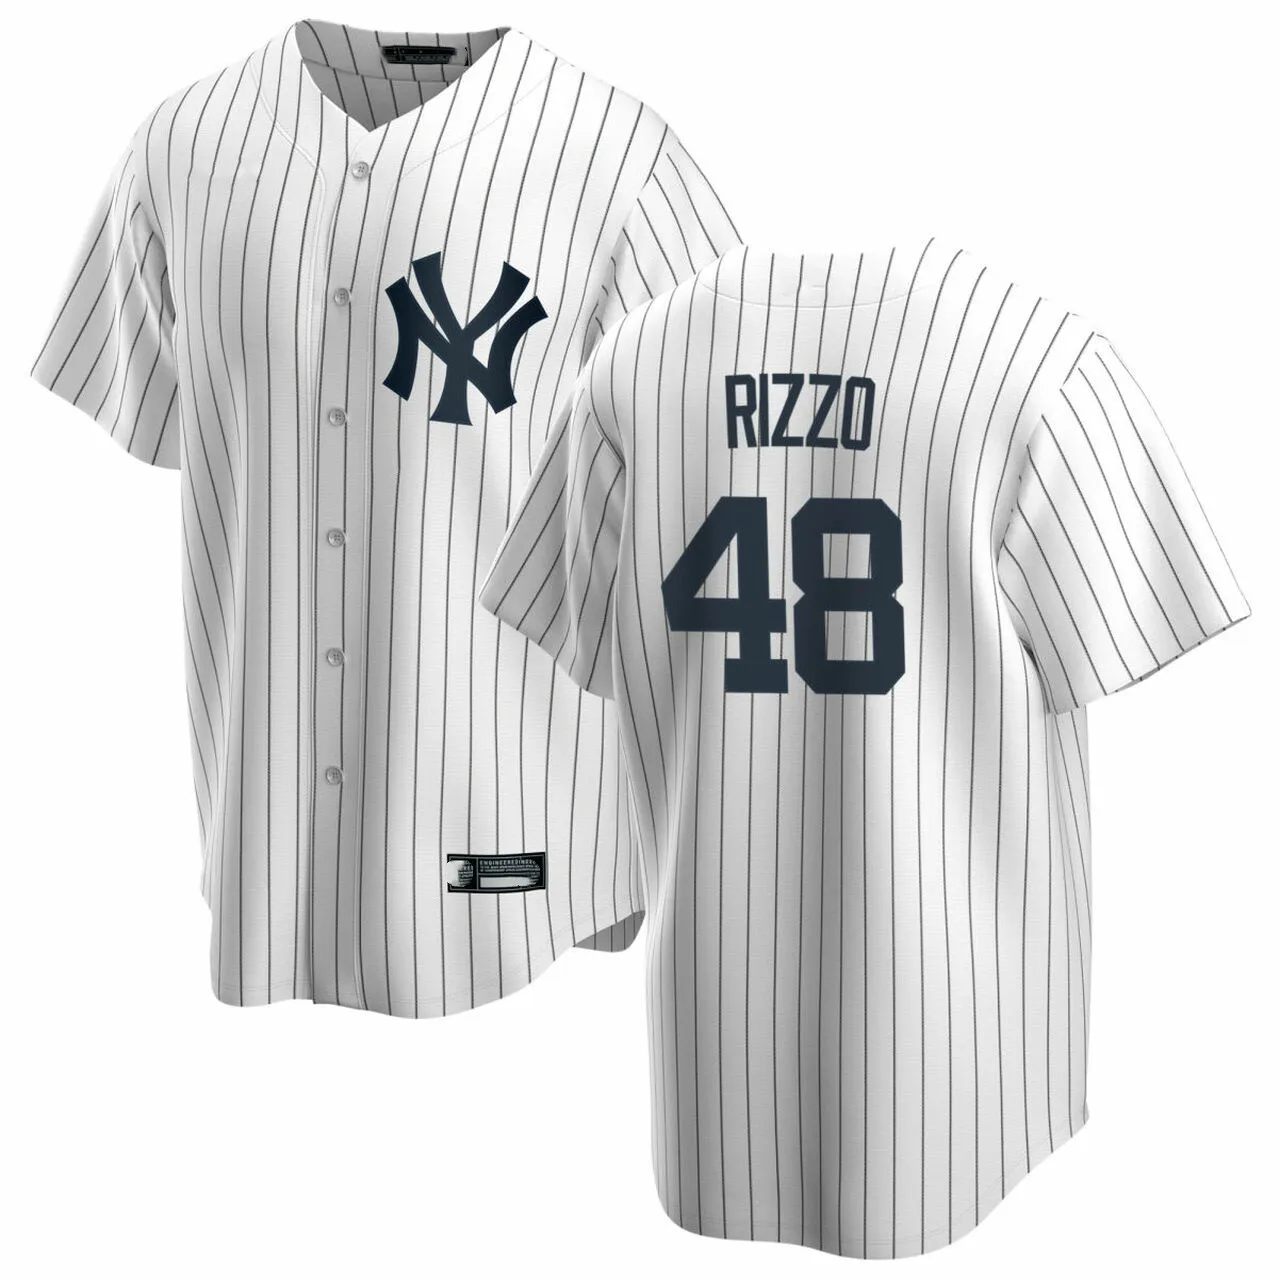 

2021 New Style Wholesale China Best Quality New York Stitched Cheap Baseball Jerseys Custom Sports Team 48 Anthony Rizzo, White,blue,black,gray,red